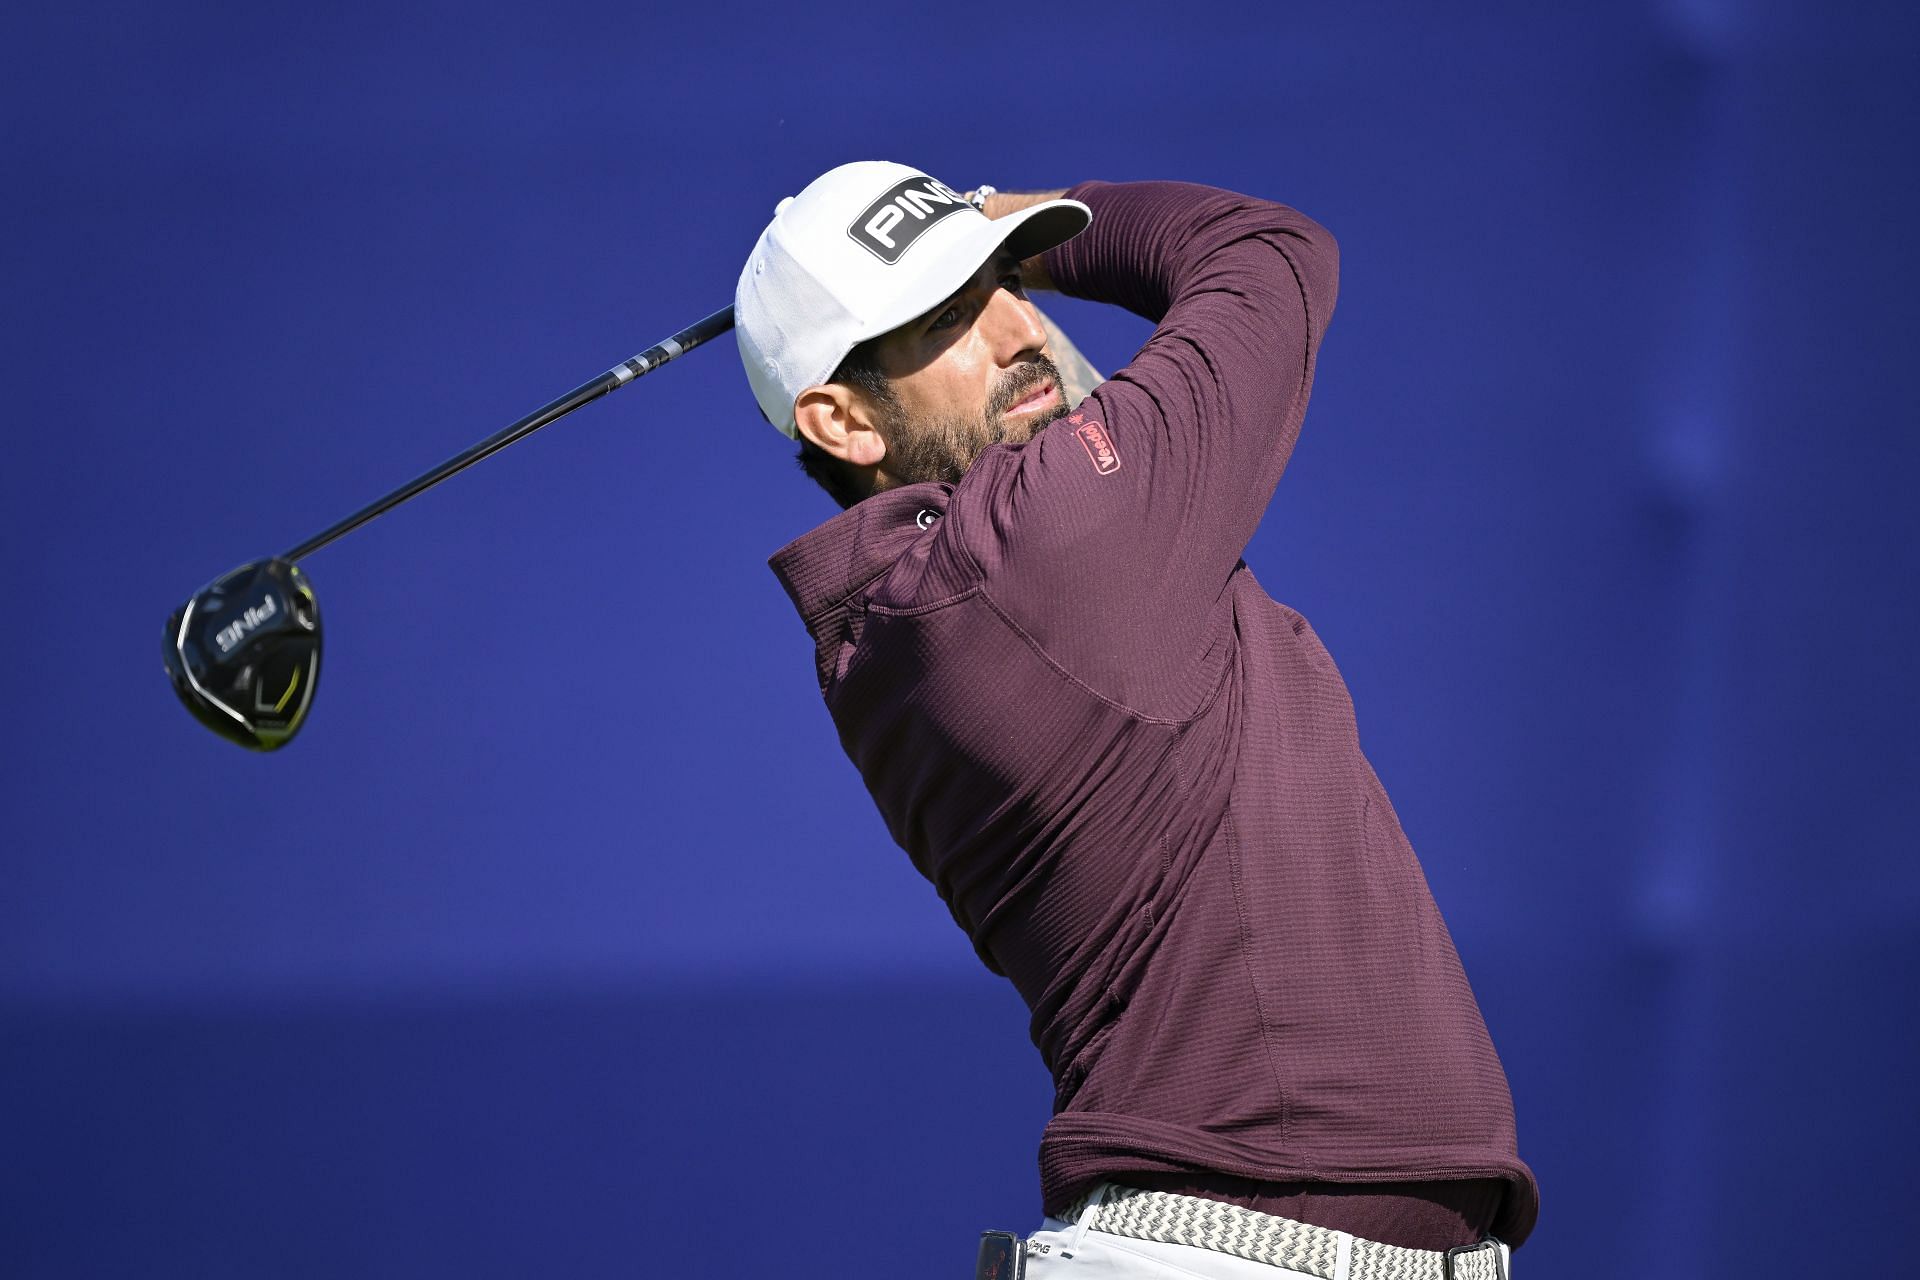 Matthieu Pavon plays his shot from the seventh tee during the third round of the Farmers Insurance Open